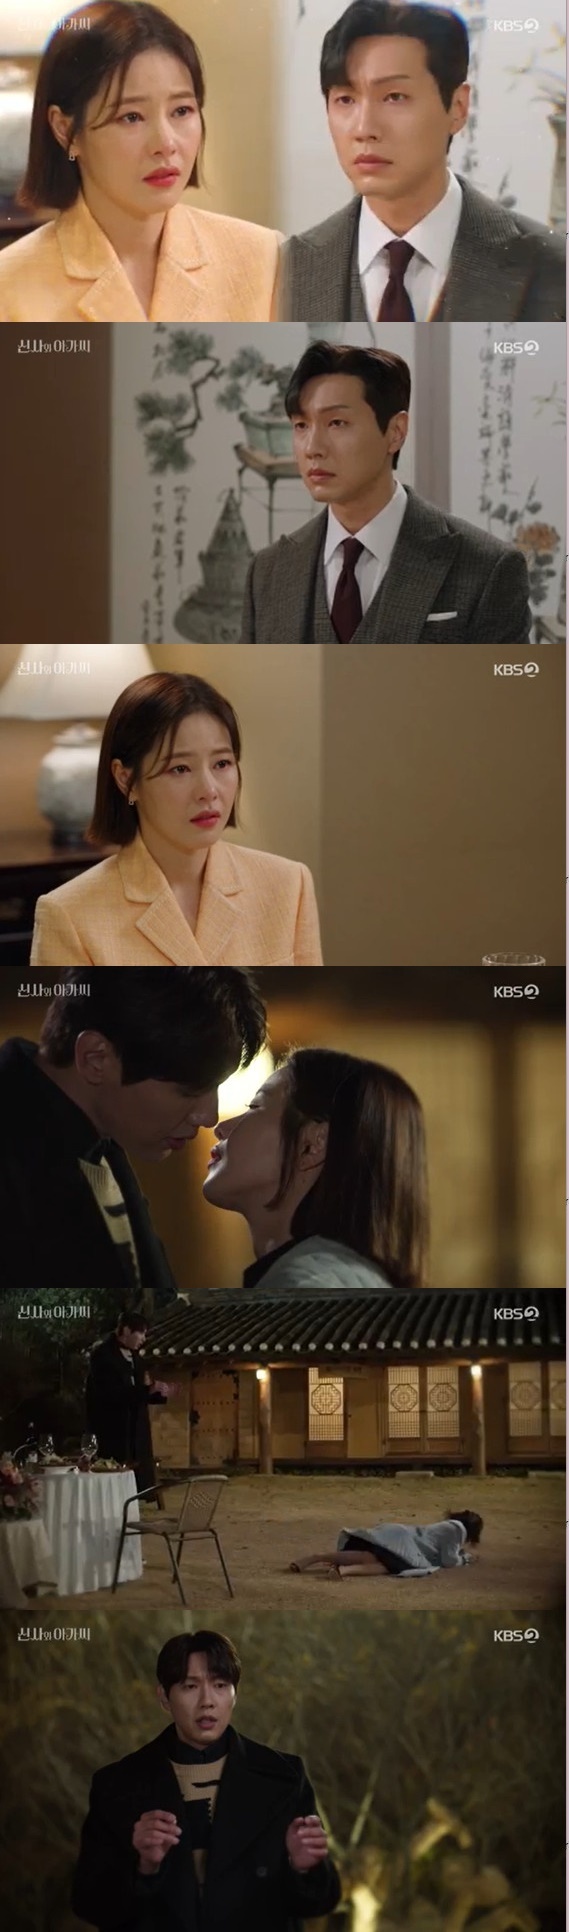 Seoul = Park Ha-na caught lying to Ji Hyun WooIn the 45th KBS 2TV weekend drama Shin Sa and Young Lady (directed by Shin Chang-seok and Kim Sa-kyung), which was broadcast on the afternoon of the 5th, Park Dae-beom (played by Ahn Woo-yeon) and Lee Se-ryun (played by Yoon Jin-yi) went to the Wedding ceremony chapter of their brother, Lee Young-guk (played by Ji Hyun Woo) and reunited with Lee Young-guk (played by Lee Woo) I did.Then, by chance, the two were trapped together in the elevator. Sorry, Lee Young-guk said, No, Im sorry.I do not believe that I am such a person, he said. Do not tell me to forget. Lee said, Mr. Park is proud.I can do well, he said. I forget to live with my heart and do not cry because of someone like me anymore. However, Park said, I do not like it.Back at home, Park recalled a story Lee Young-guk told when he was 22 years old after lying helplessly and shedding tears.The suspicion between Lee Young-guk and Jo Sa-ra was that Park Dan-dan called a man, but he did not answer.Lee Se-hee recalled what 22-year-old Lee Young-guk said to him in the past, The president said to me, I tried to kiss the chief, but I did not do it.I do not know why I do it with the chief of staff, but it is clear that I liked it only when I was 22 years old. How do you have a child?So lets not break up. He added, I think the chief is lying. I think the chief is not your child. What are you talking about? What woman is lying about a child in her stomach? I can not deny it.I am a child who will be born in the world because of me, but there is no reason for an innocent child to be denied. He said, Do not come back. However, Lee Se-hee said, I believe in the chairman, why does not the chairman believe him? He said, I can not do that.Josara (Park Ha-na), who had lied about having a child of Lee Young-guk and came back to the house, stirred the familys livelihood at will.However, Kim (Kim Ga-yeon) stopped such a investigation. After that, Lee Young-guk said, My position in this house is unclear.I tried to organize my clothes like before, but I was kicked out of the room because I could not touch the goods. Lee Young-guk said, I am comfortable with Kim doing my job. I ignore me. I have to be an official fiancee to have a child. I have come to have a child.I do not want to be treated like that. But Lee Young-guk said, I did not ask you to come in, and Cho insisted on it.I did not say that I was not hurting others and being quiet. I did not remember that, but I accepted it because it was my child.I need time until my memory returns, dont talk about anything more than a child, said Cho, who returned to the room, calmly. Theres still a lot of time.I will somehow make my president my man while I am in this house. Bong Joon-oh (Yang Byung-yeol) and Kang Mi-rim (Kim I-kyung) continued their love affair secretly with their families, and while they were trying to kiss on the street, they were discovered at the scene by Cha-gun (Kang Eun-tak) and Park Dae-beom.So four people gathered at the restaurant. Park said, I knew it was my son, so I broke up. But Bong Joon-oh and Kang Mi-rim said, Can not you break up?The car was absurd, and Park Dae-bum said, If you know it in both houses, you will be bloody. What are you going to do? Ma Hyun-bin (Itaeli) showed interest in Park Dan.Lee Sejong (Seo Woo-jin) was depressed after Park Dan-dan left home; he tried to buy the heart of his own son, Sejong, who was called Josa, but he turned away.I took my brother Lee Se-chan (Yoo Jun-seo), who was worried about Sejong, who said, I can not sleep, and took his brother to Park Dan-dan.Sejong could not sleep a sigh, and it hurts. He said, I want to live in this house. I do not want to go home. When asked why, he said, I do not know why my aunt lives in my house. I understand that Father understands, but I do not understand. Father does not even drink alcohol to meet.Father, I have never seen you laugh. My sister is sensitive, so I dont go in and lock the door.Lee Young-guk then persuaded the children who returned home not to go to Park Dan-dan, but Lee Jae-ni (Choi Myung-bin) told Father, Let them meet if they want to see the teacher.After the children came home, Lee Se-ryun (Yoon Jin-yi) visited his brother Lee Young-guk, who said, The children are uncomfortable with the chief.Its weird to think about it.When I was 22 years old, I told me that my aunt was only my sister, and I should not try to like her. I do not really understand that I had a child with her. Lee Jae-ni came home alone, and Jo Jora asked him to bring the children together. Lee Jae-ni said, Sejong is sick because of her aunt.What is she like? But Josa said, Im your mother. Youre a lady at the end of the day. Youre not gonna be so cheap.But Lee Jae-ni said, Who is my mother, if you are going to say that, get out of my house right now.Kim, who watched this, reported the situation to Lee Young-guk and said, Investigation is coming in and the house is open. Please take wise measures.Lee Young-guk, who was worried, visited Lee Jae-ni. Lee Jae-ni said, It is difficult for everyone as well as me.I tried to endure it again, but I can not do it. He said, I think I will run away from my aunt and I do not want to come home now.Lee Yeong-guk told Cho Sa-ra, go home.I will do the best I can, he said. I should have told the children enough before the chief came home, but I did not think about it. But I can not go.I want to be next to the president for my childs prenatal care. He pretended to fall down in shock.Lee then came out of the house and recalled the memory he had lost when he was 22 years old, and called out to eat rice.At that time, I went to eat rice and watched movies. Lee Young-guk asked Jo Jo-ra to tell me the situation at the time of the proposal, and made it up as if there was no investigation.He said he had a child that day, saying that he had the first kiss there. However, Lee Young-guk looked at him coldly, saying, Why are you lying?On the other hand, Gentleman and young lady is a drama about the turbulent story that happens when gentleman and young lady meet to fulfill their responsibilities and happiness.It airs every Saturday and Sunday at 7:55 p.m.